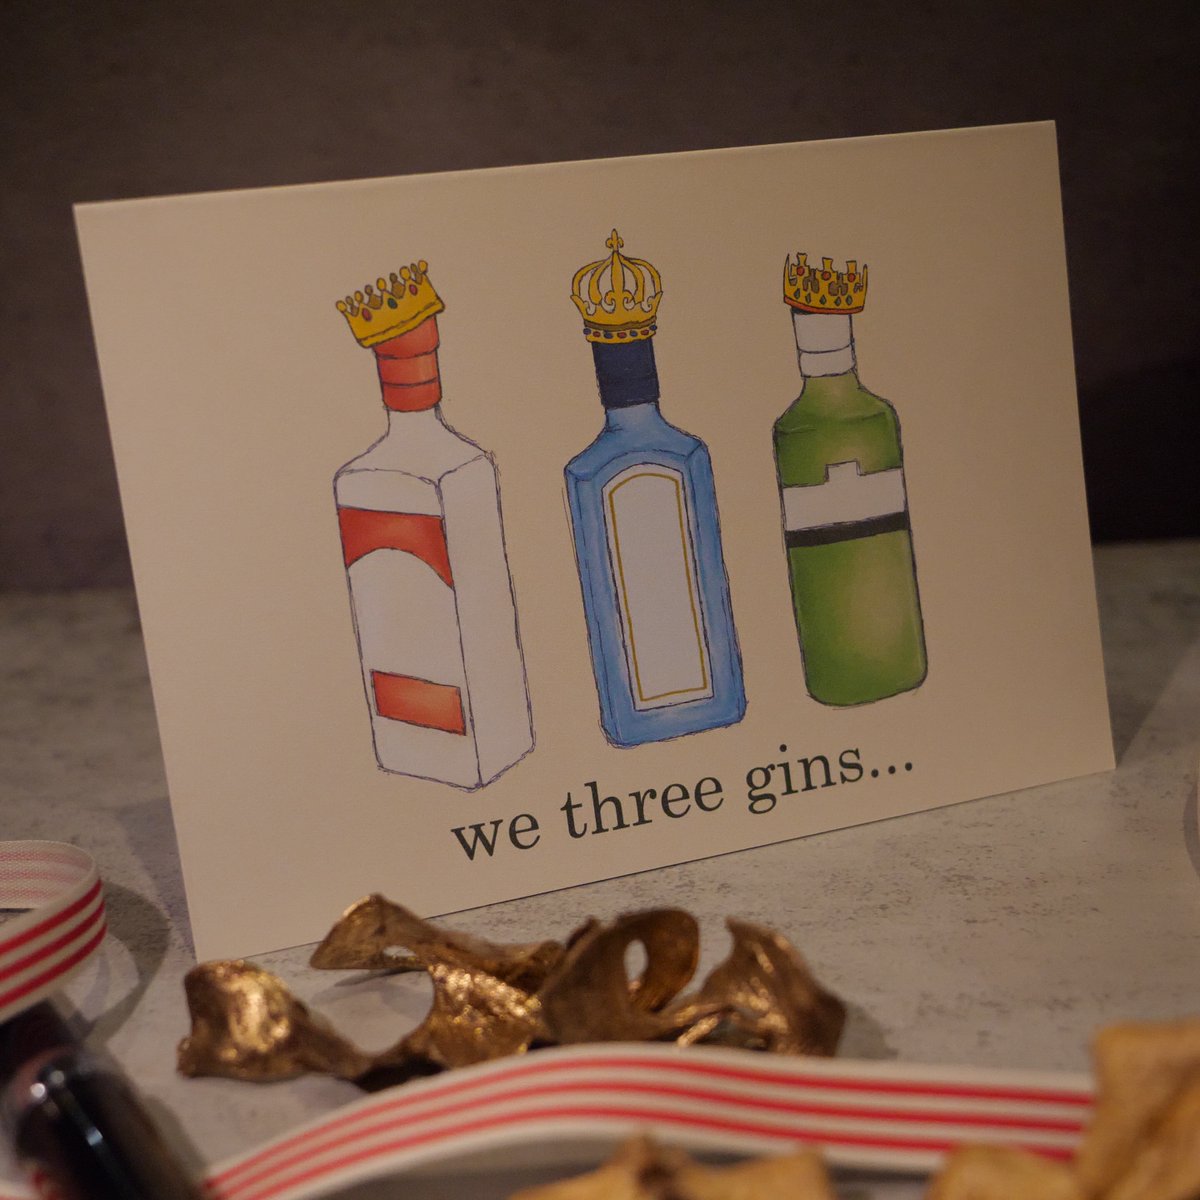 If you are buying a gin related gift then really you need a gin related card! #3gins #christmascard #gincard #card #greetingcard #greetingscard #bespokecards #artisan #local #localart #bespoke